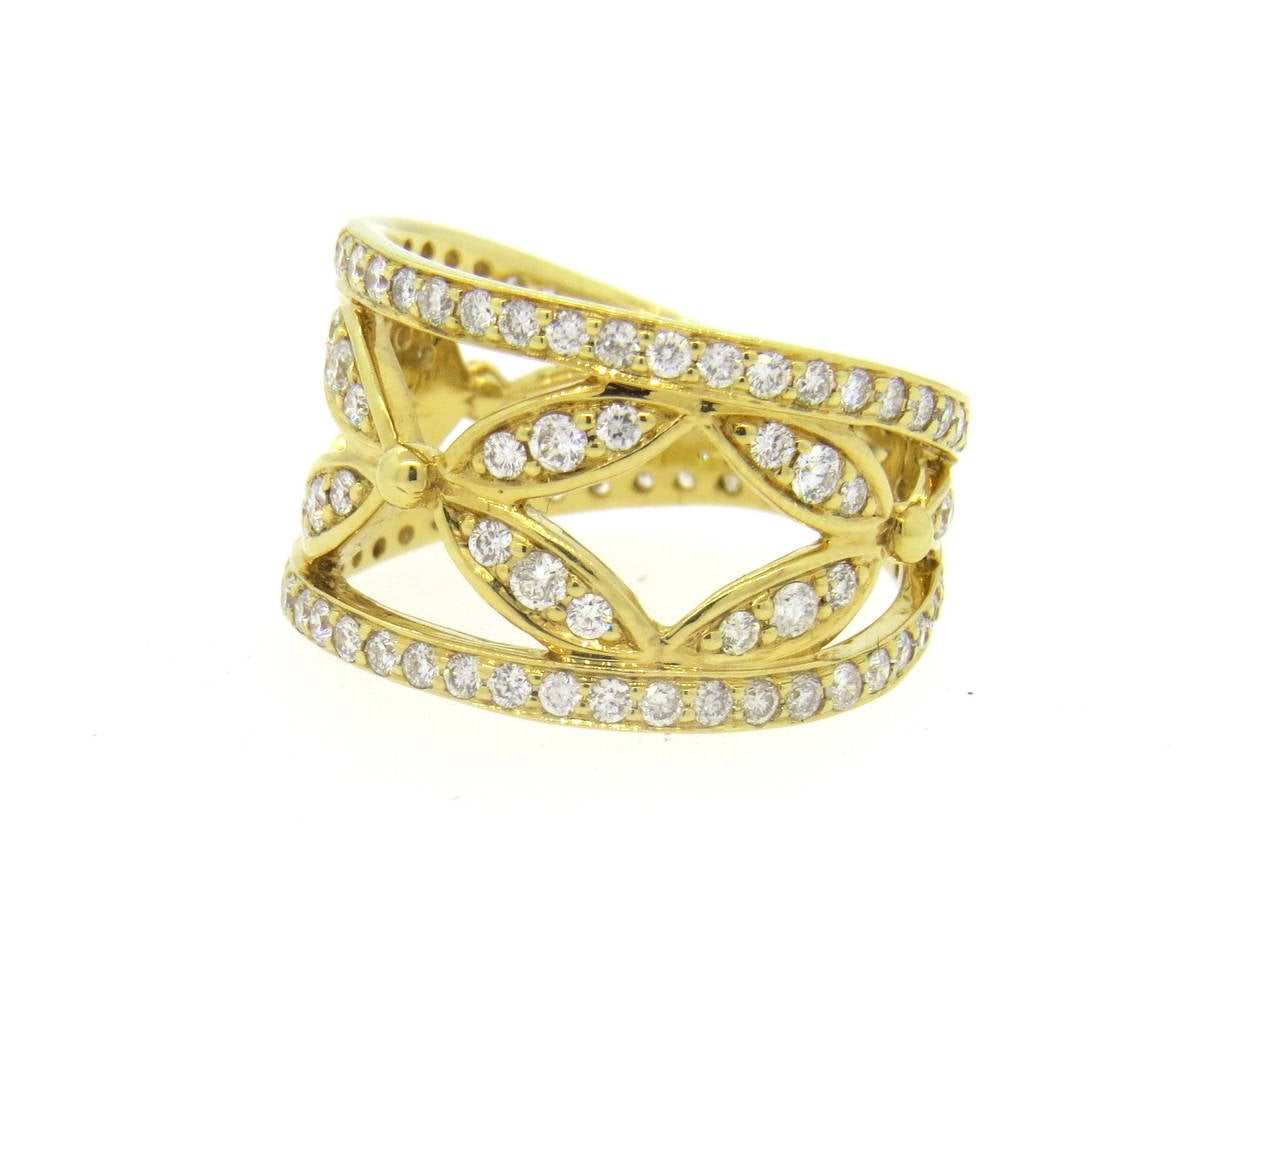 An 18k yellow gold ring set with 1.30cts of G/VS diamonds.  Crafted by Temple St. Clair, the ring is a size 6.5 and measures 12.5mm in width.  The weight of the ring is 6.4 grams.  Current Retail is $6500.  Marked: Temple St. Clair Hallmark, 750